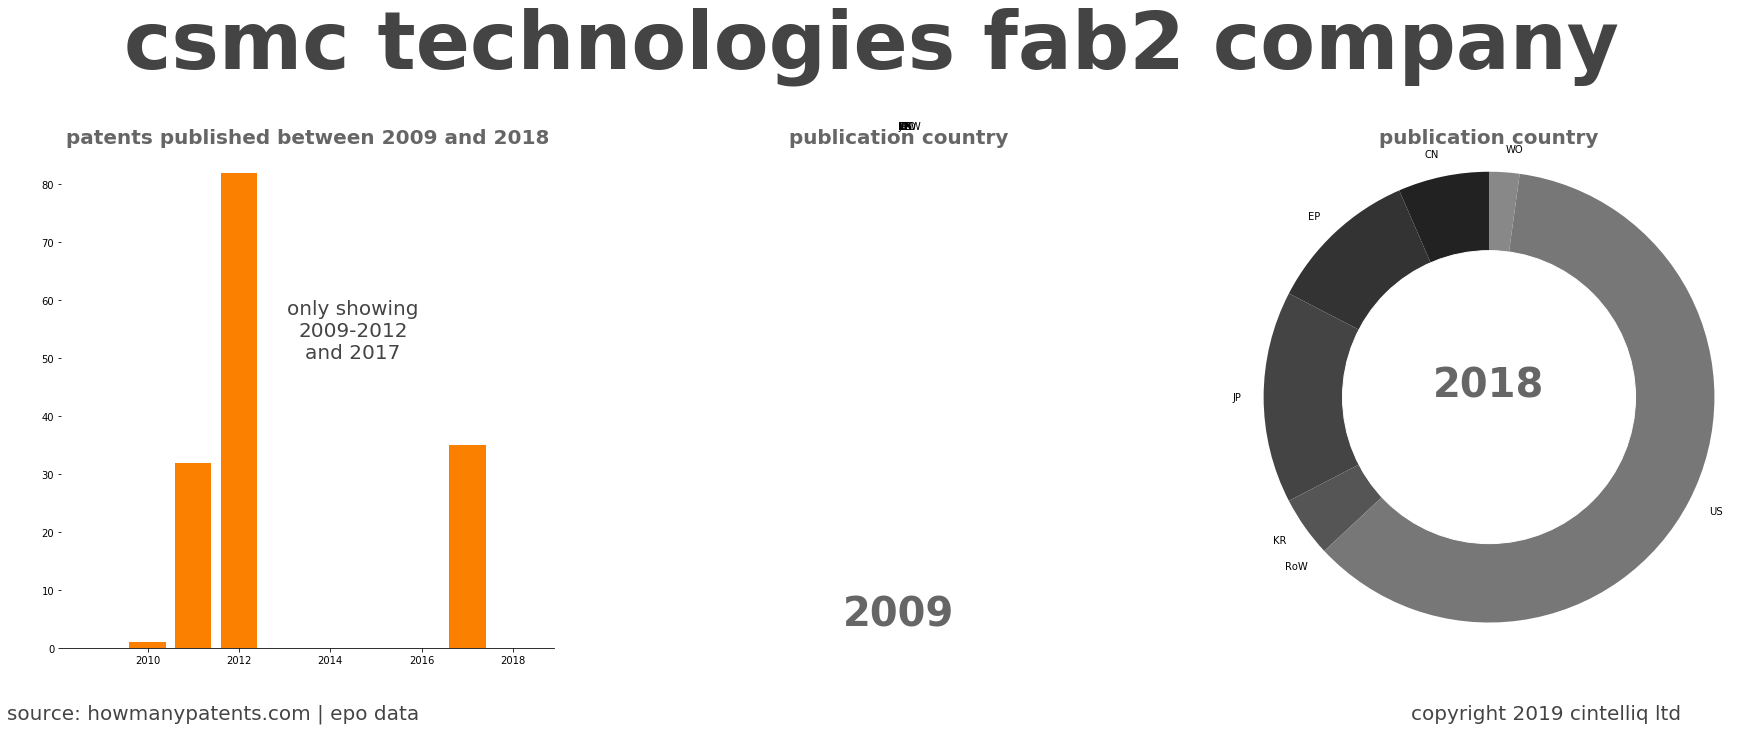 summary of patents for Csmc Technologies Fab2 Company